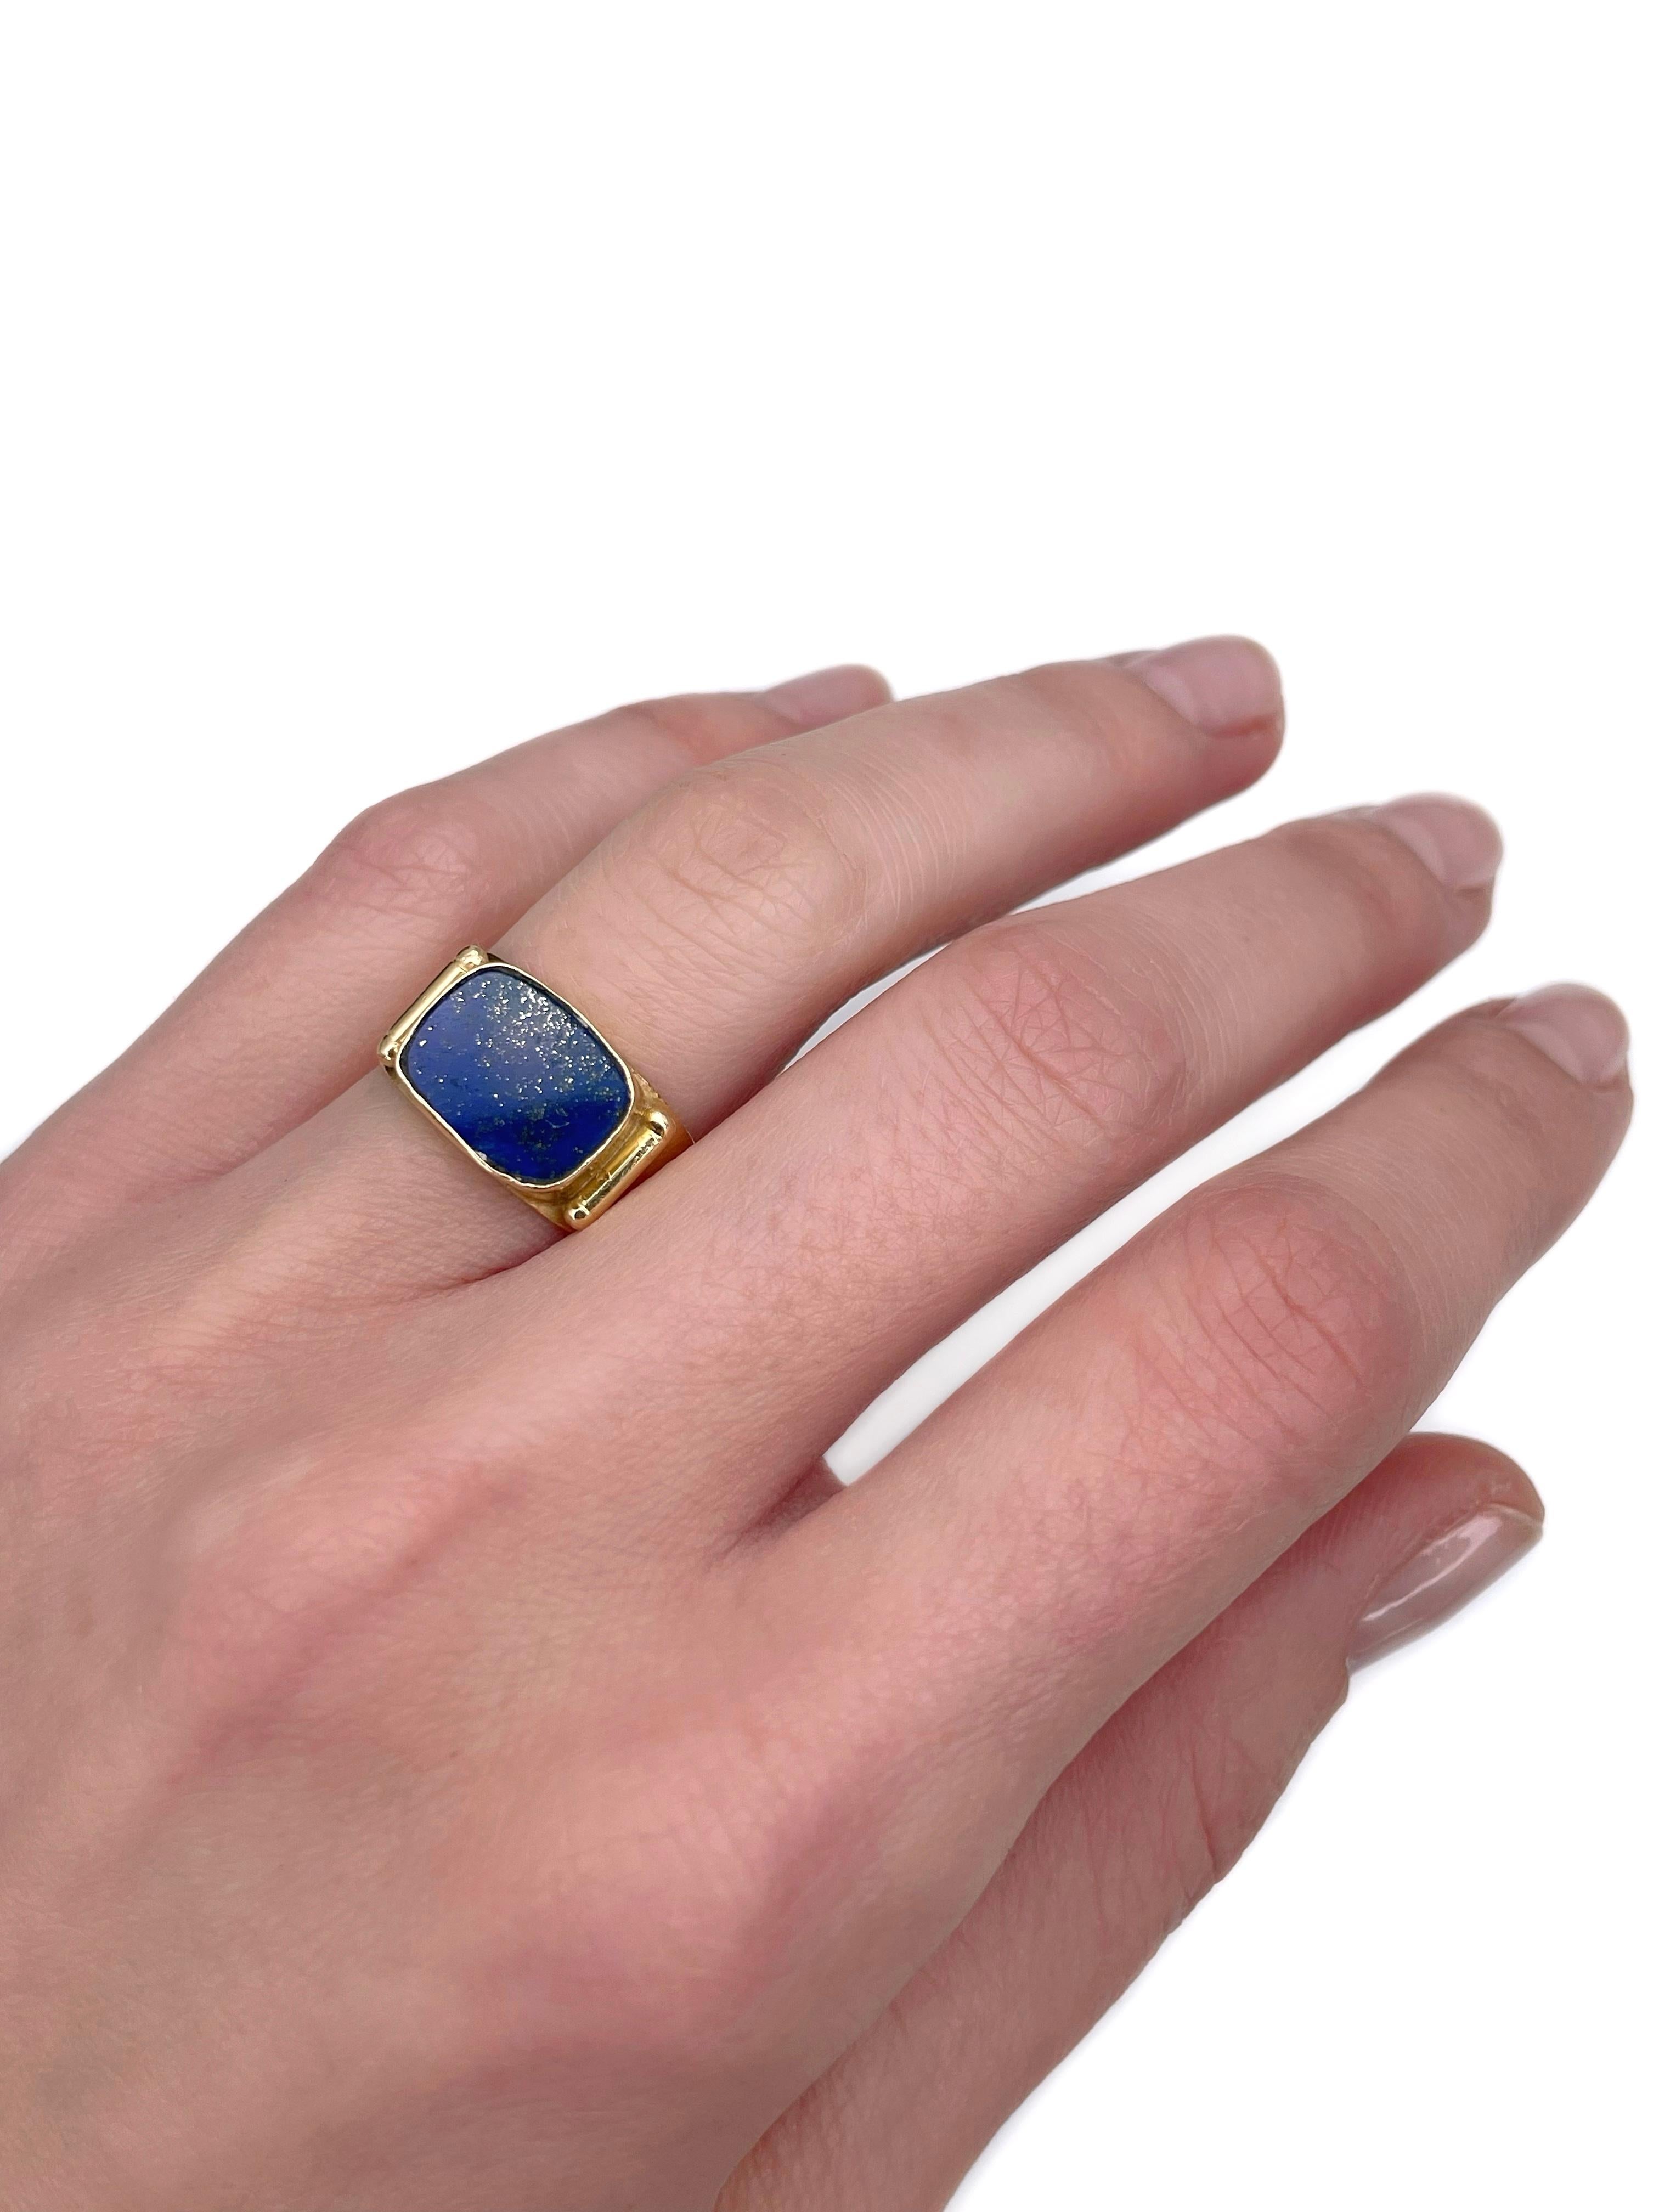 This is a Mid Century signet ring crafted in 18K yellow gold. Circa 1950. 

It features rectangle lapis lazuli. 

Could be a perfect pinky ring.

Weight: 4.78g
Size: 16 (US 5.25)

IMPORTANT: please ask about the possibility to resize before